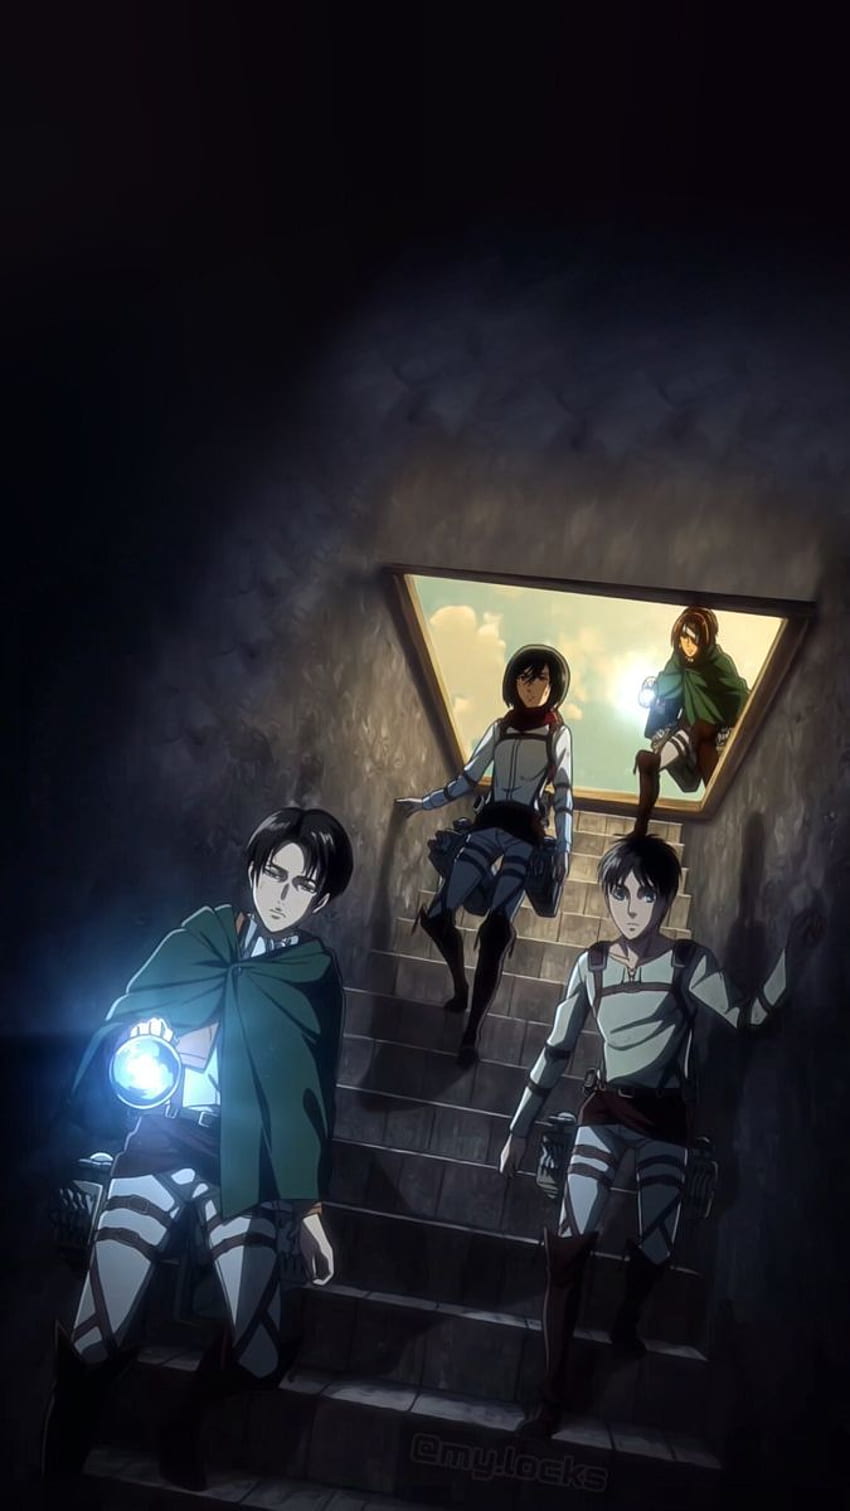 Eren, Mikasa, and their fellow Recon Corps members stand on a stairway, preparing to descend into the bowels of the Wall. - Attack On Titan